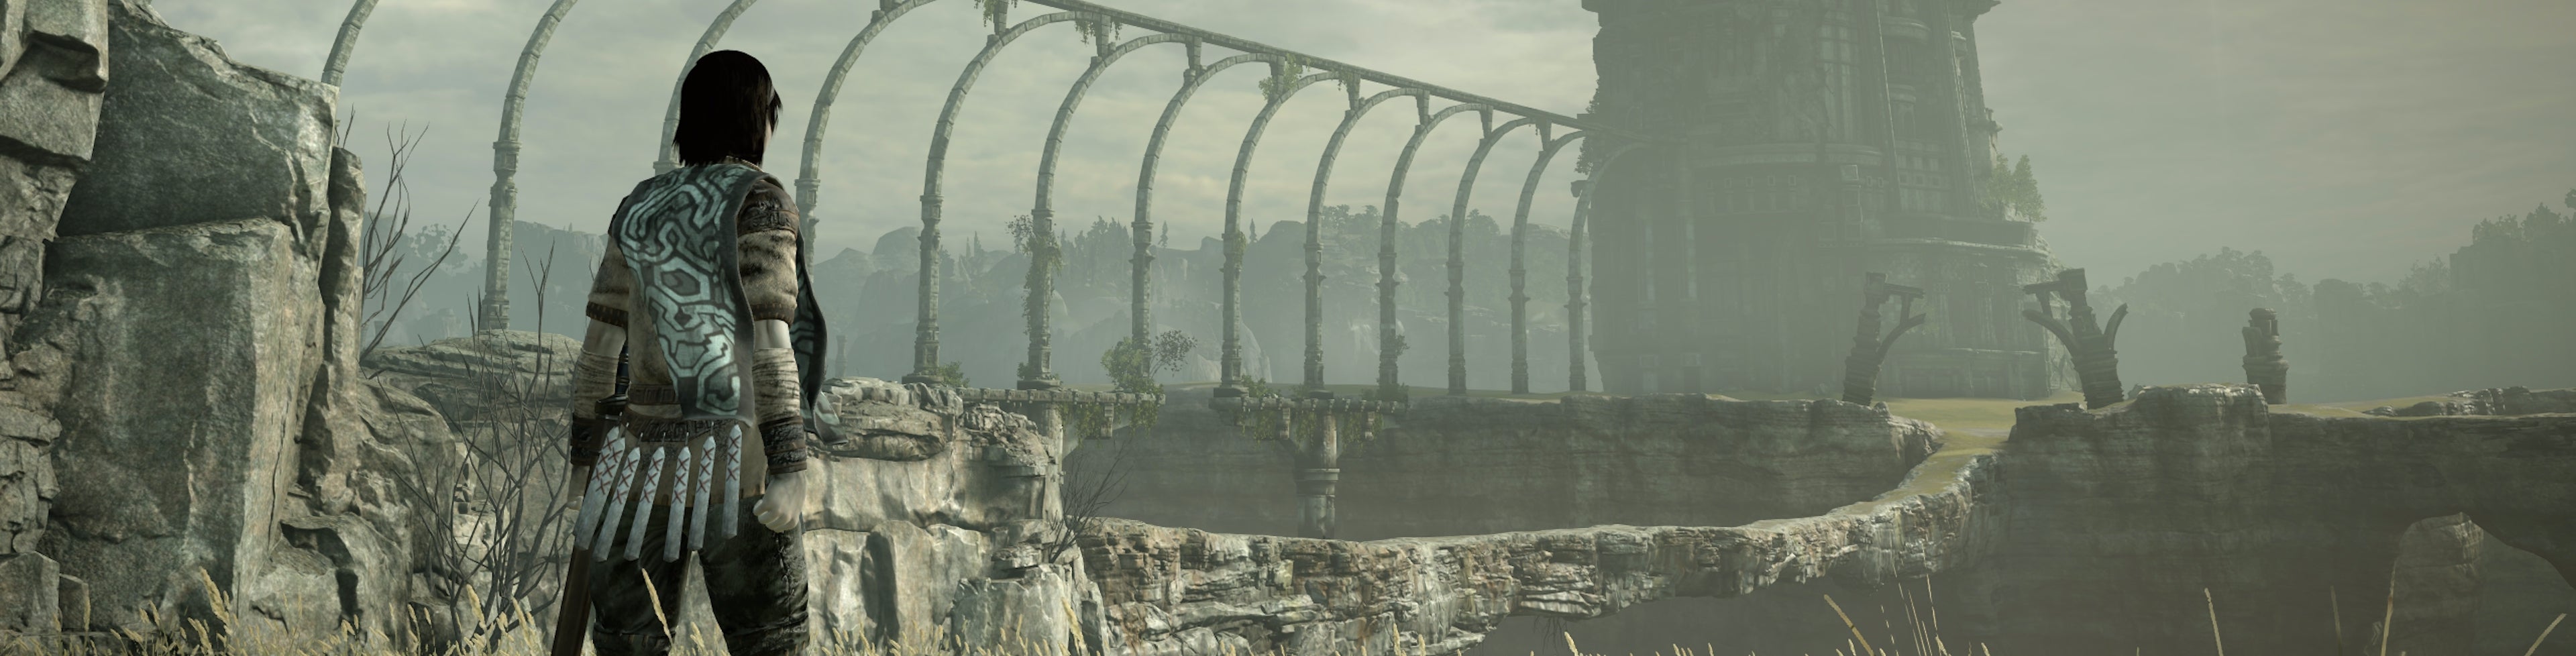 Image for The Shadow of the Colossus remake retains the original's clumsiness while doubling its majesty